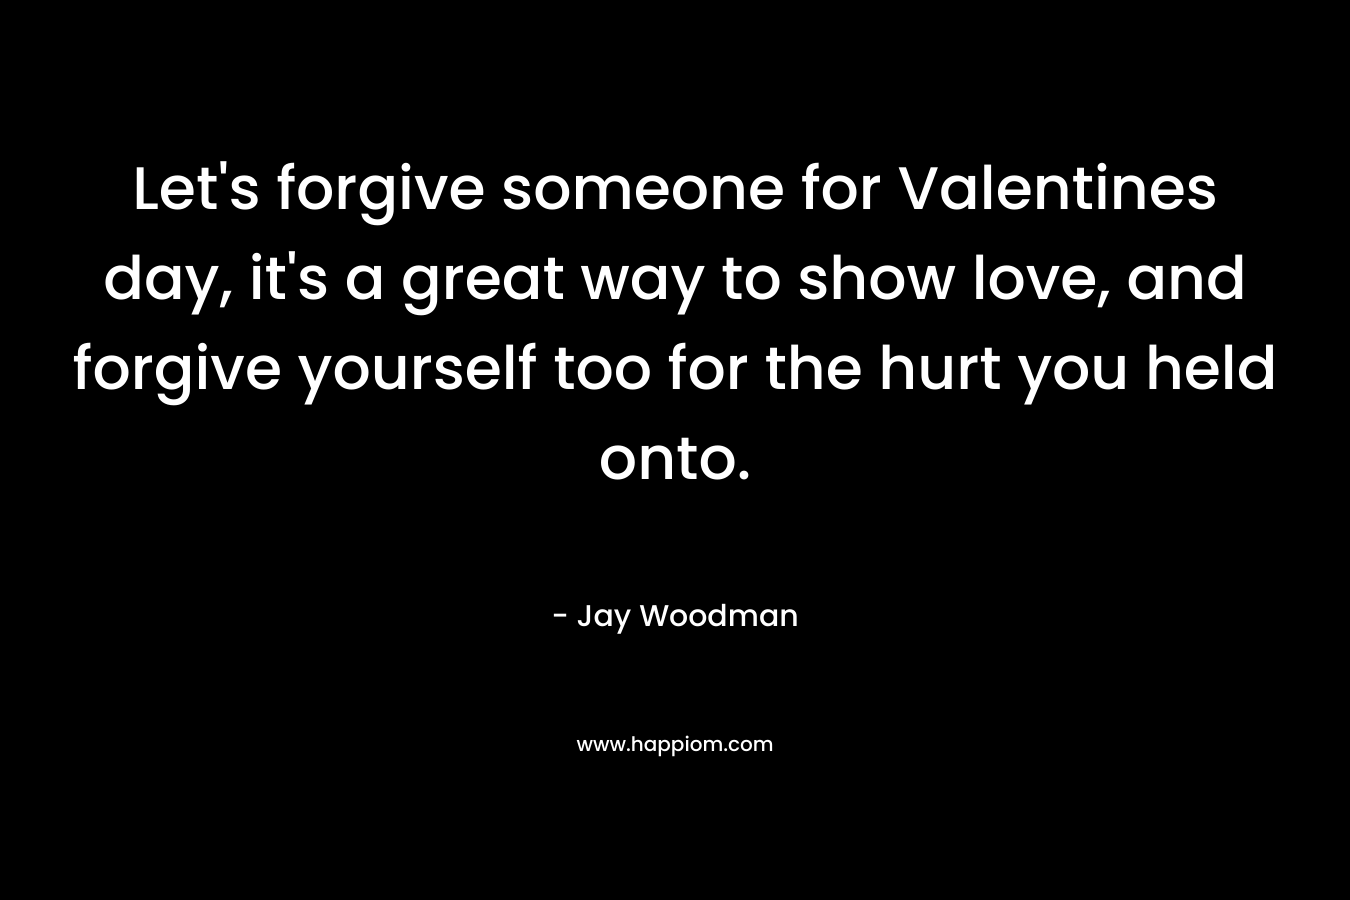 Let's forgive someone for Valentines day, it's a great way to show love, and forgive yourself too for the hurt you held onto.